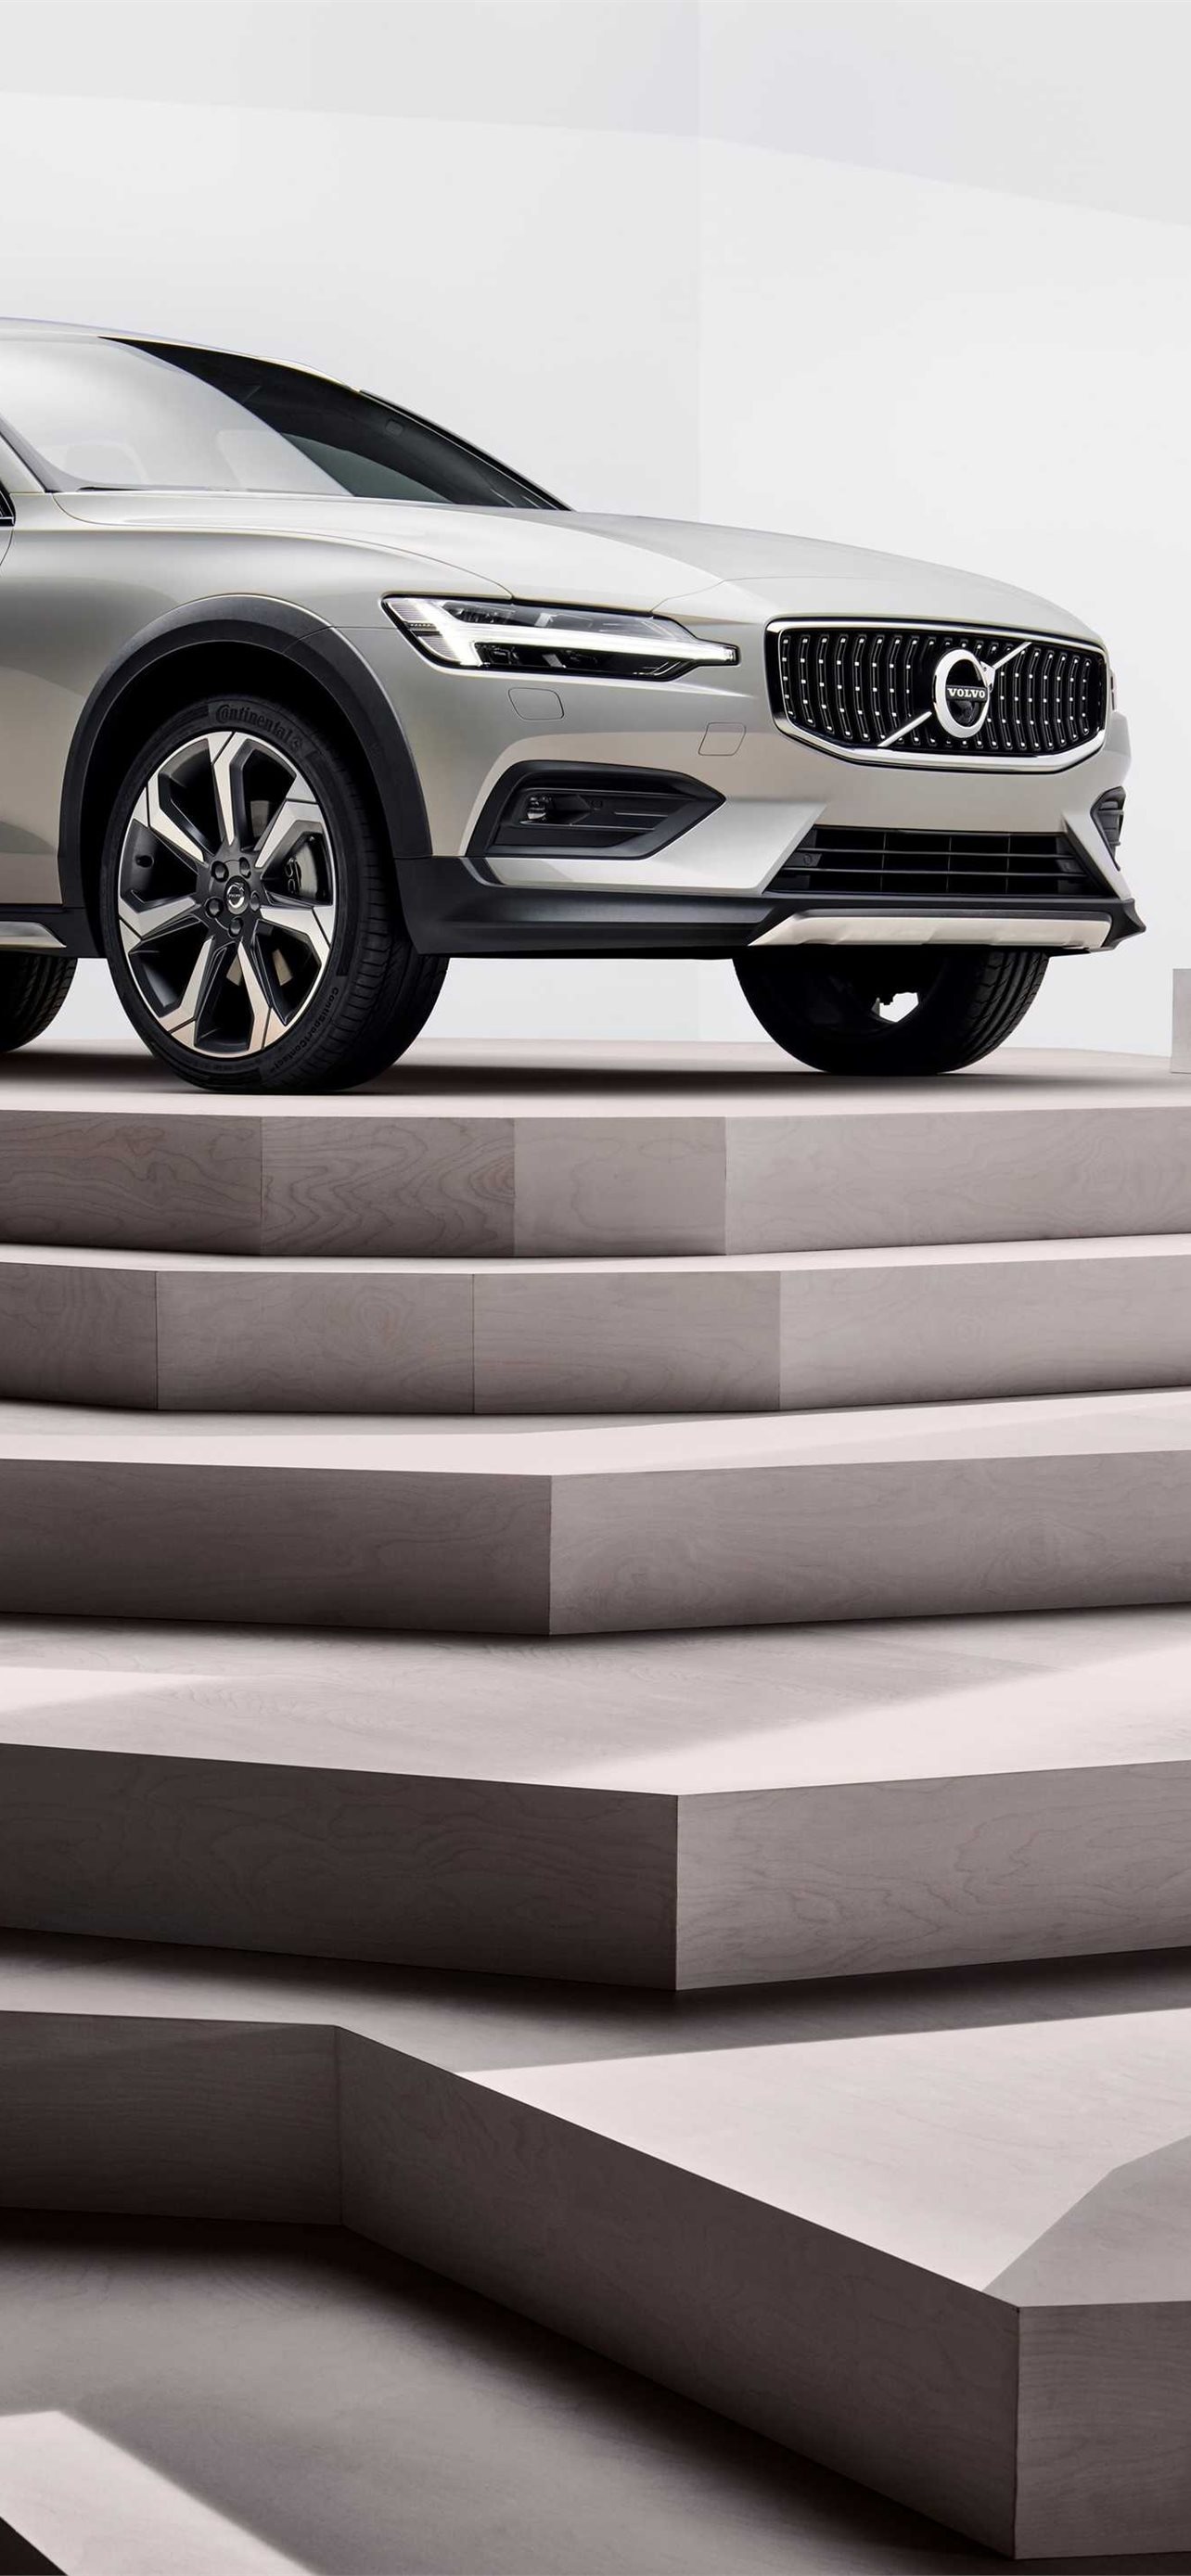 Volvo V60, Free iPhone wallpapers, Stunning design, High-quality images, 1290x2780 HD Phone